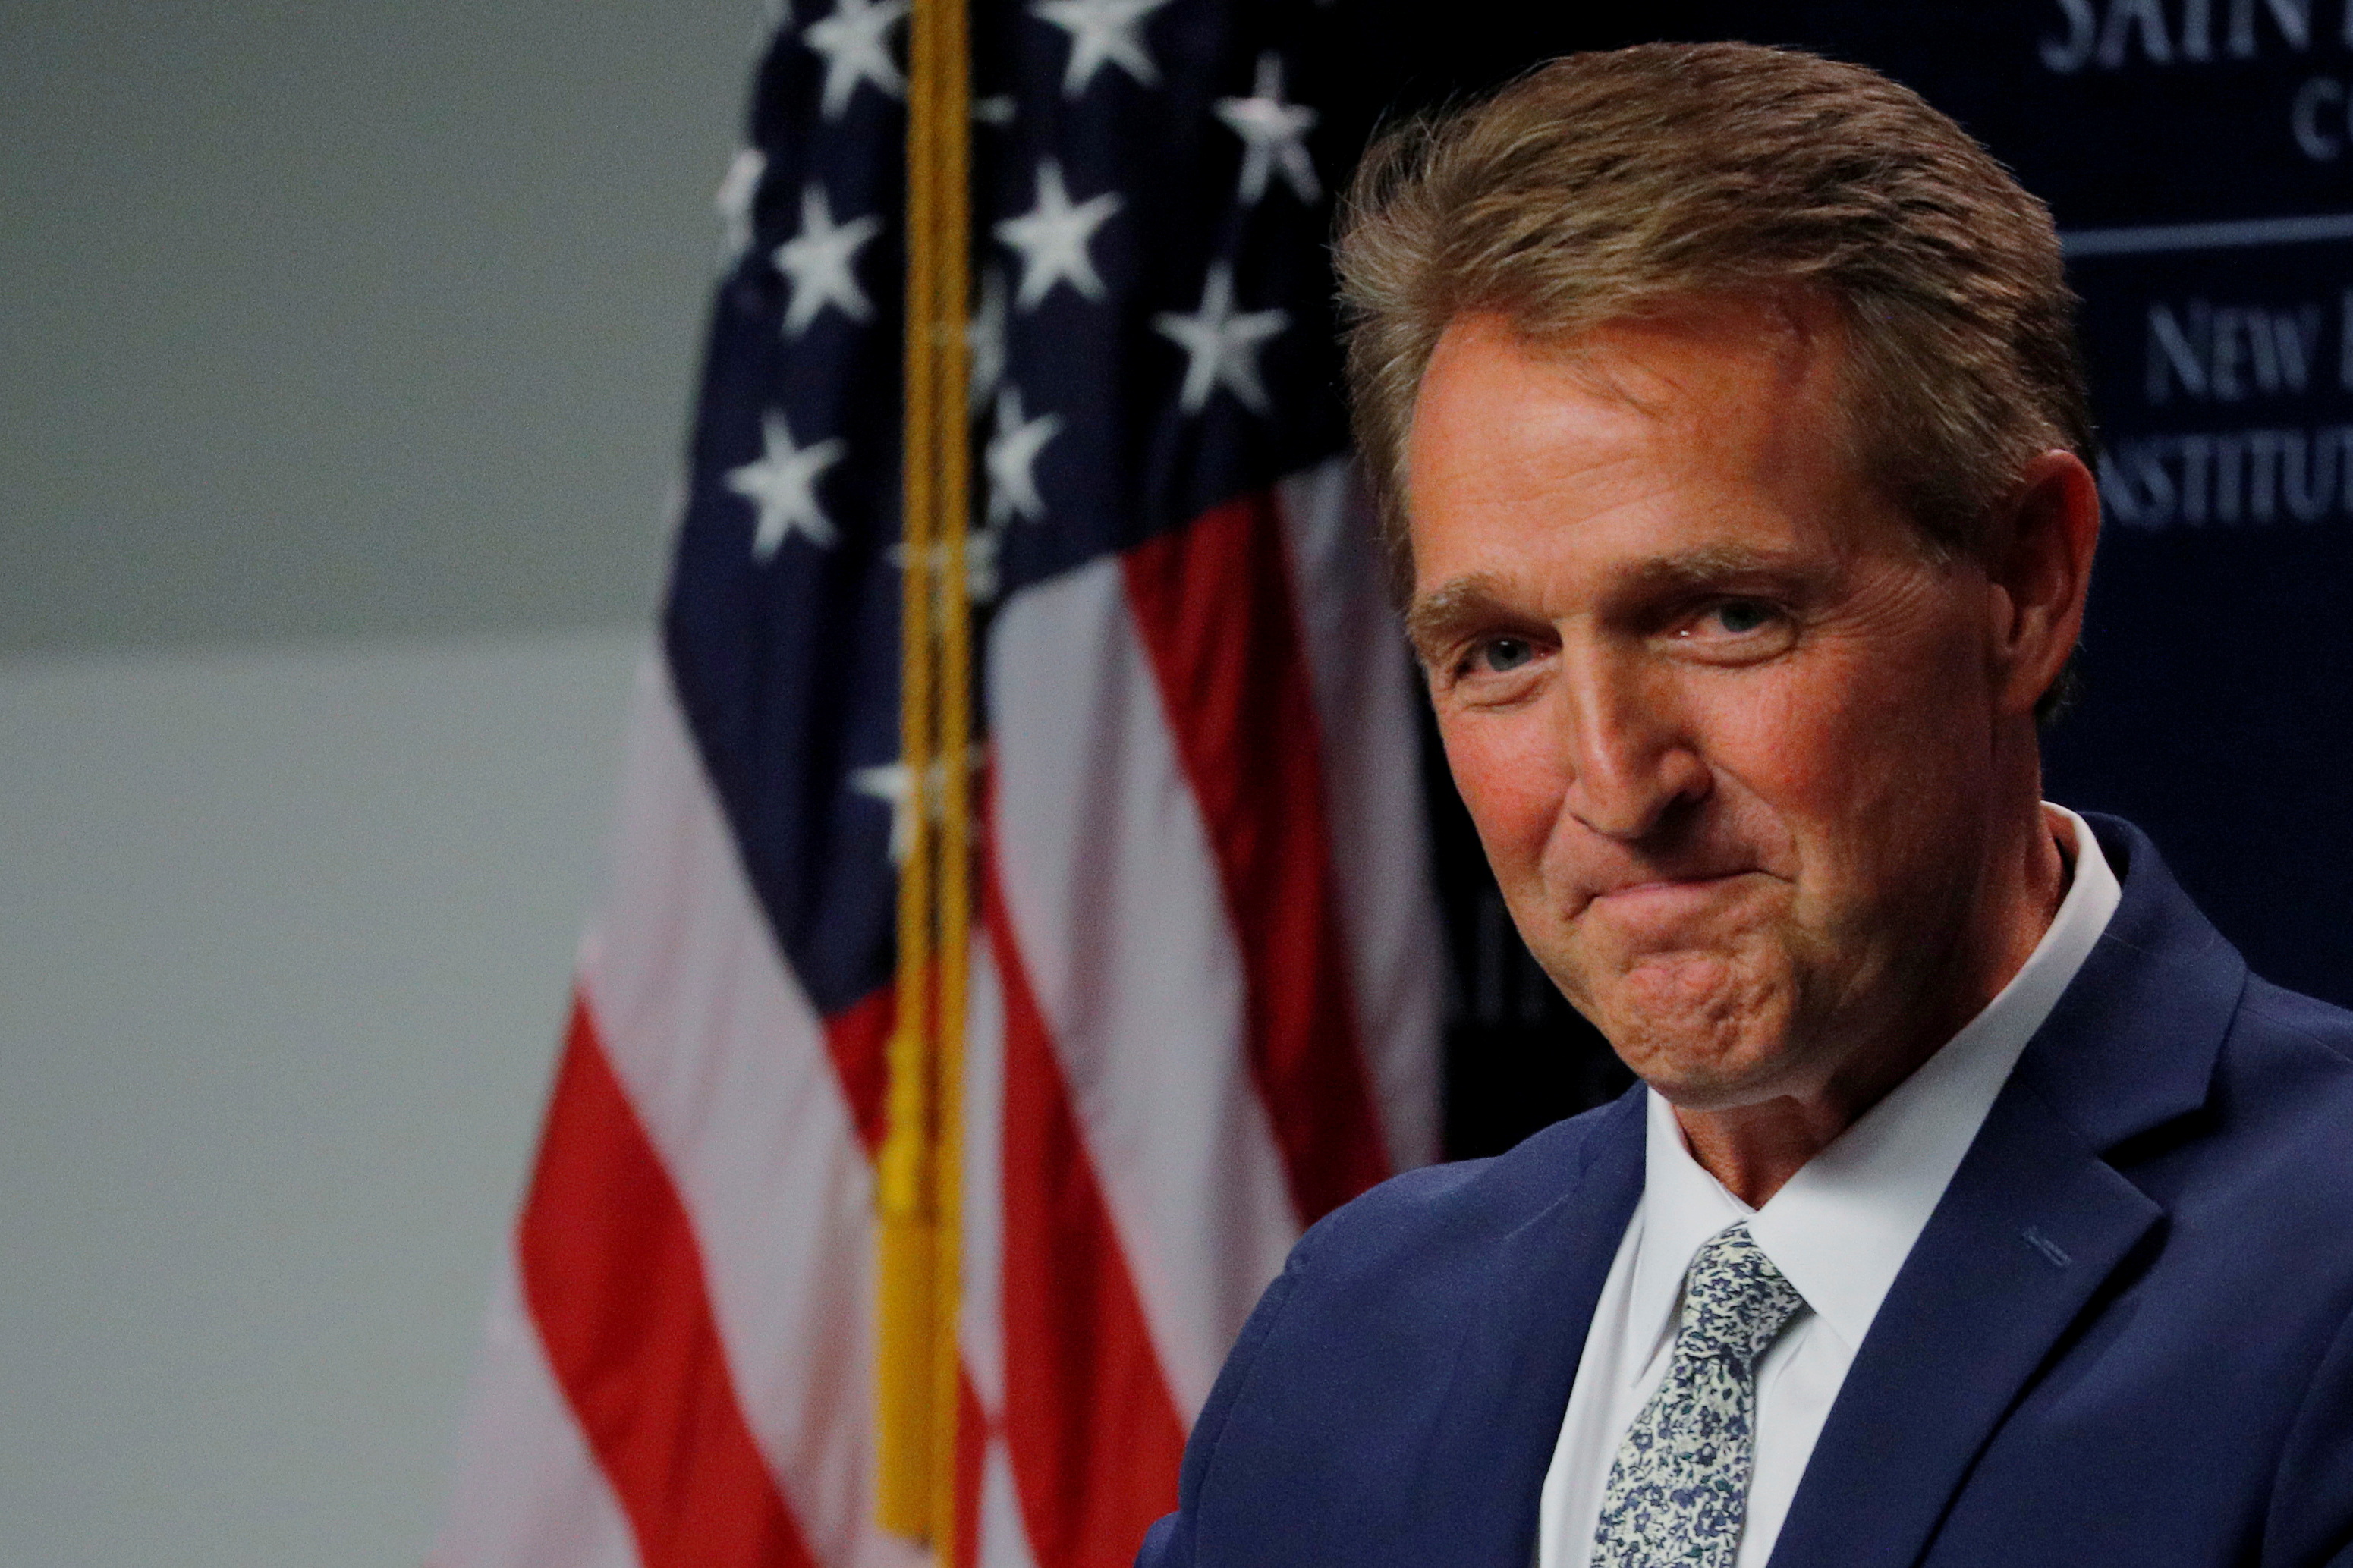 Then-U.S. Senator Jeff Flake (R-AZ) speaks at the Institute of Politics at Saint Anselm College in Manchester, New Hampshire, U.S., October 1, 2018.   REUTERS/Brian Snyder/File Photo